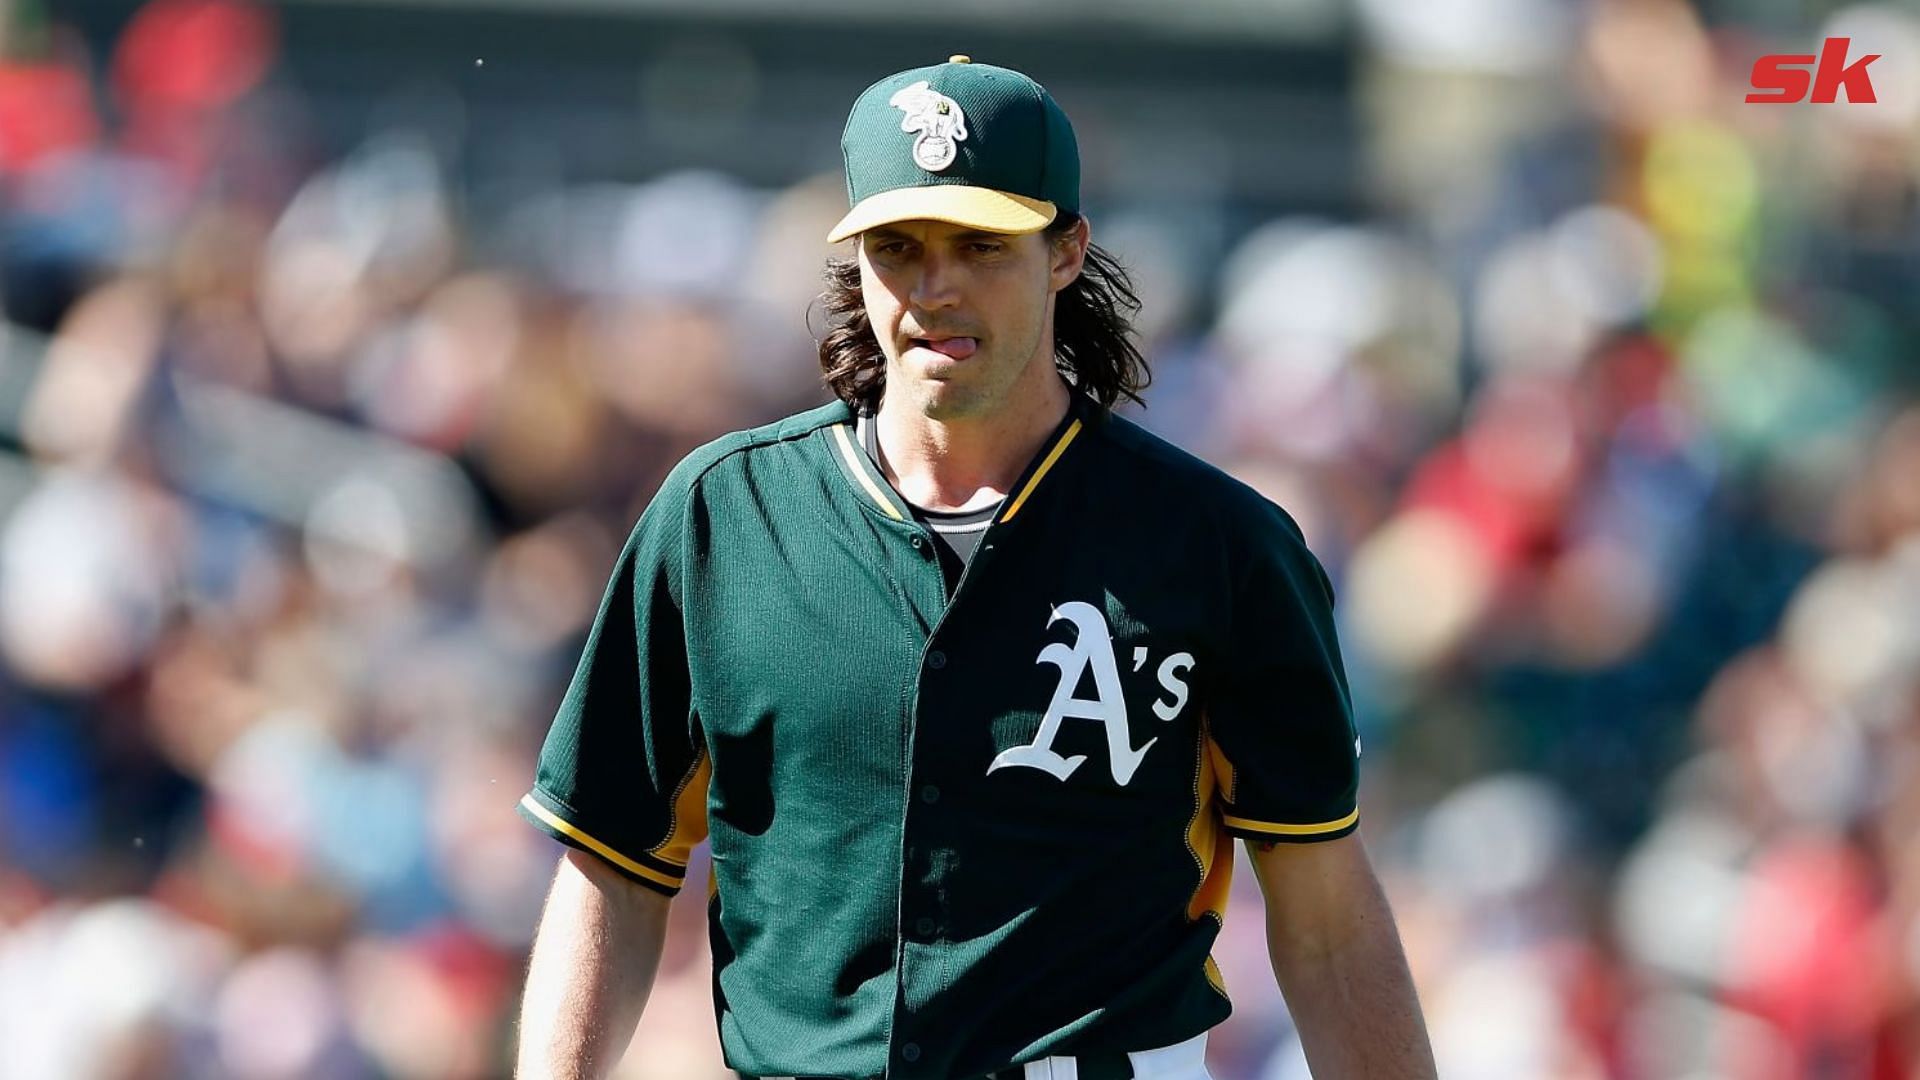 MLB star Barry Zito recounts baseball journey from fame to shame